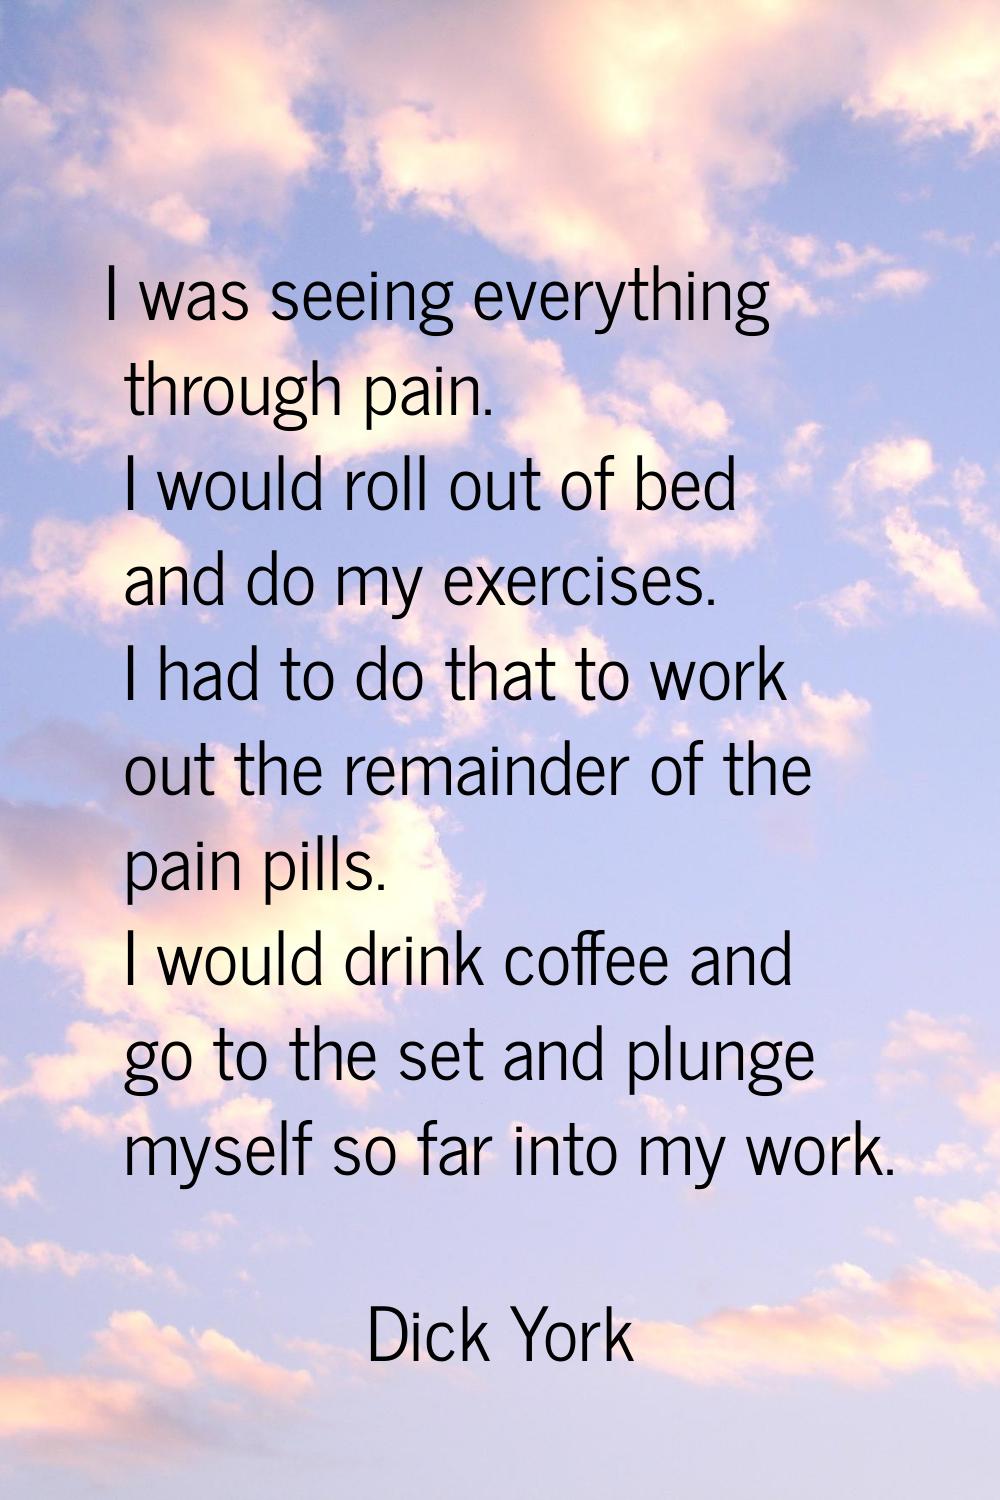 I was seeing everything through pain. I would roll out of bed and do my exercises. I had to do that